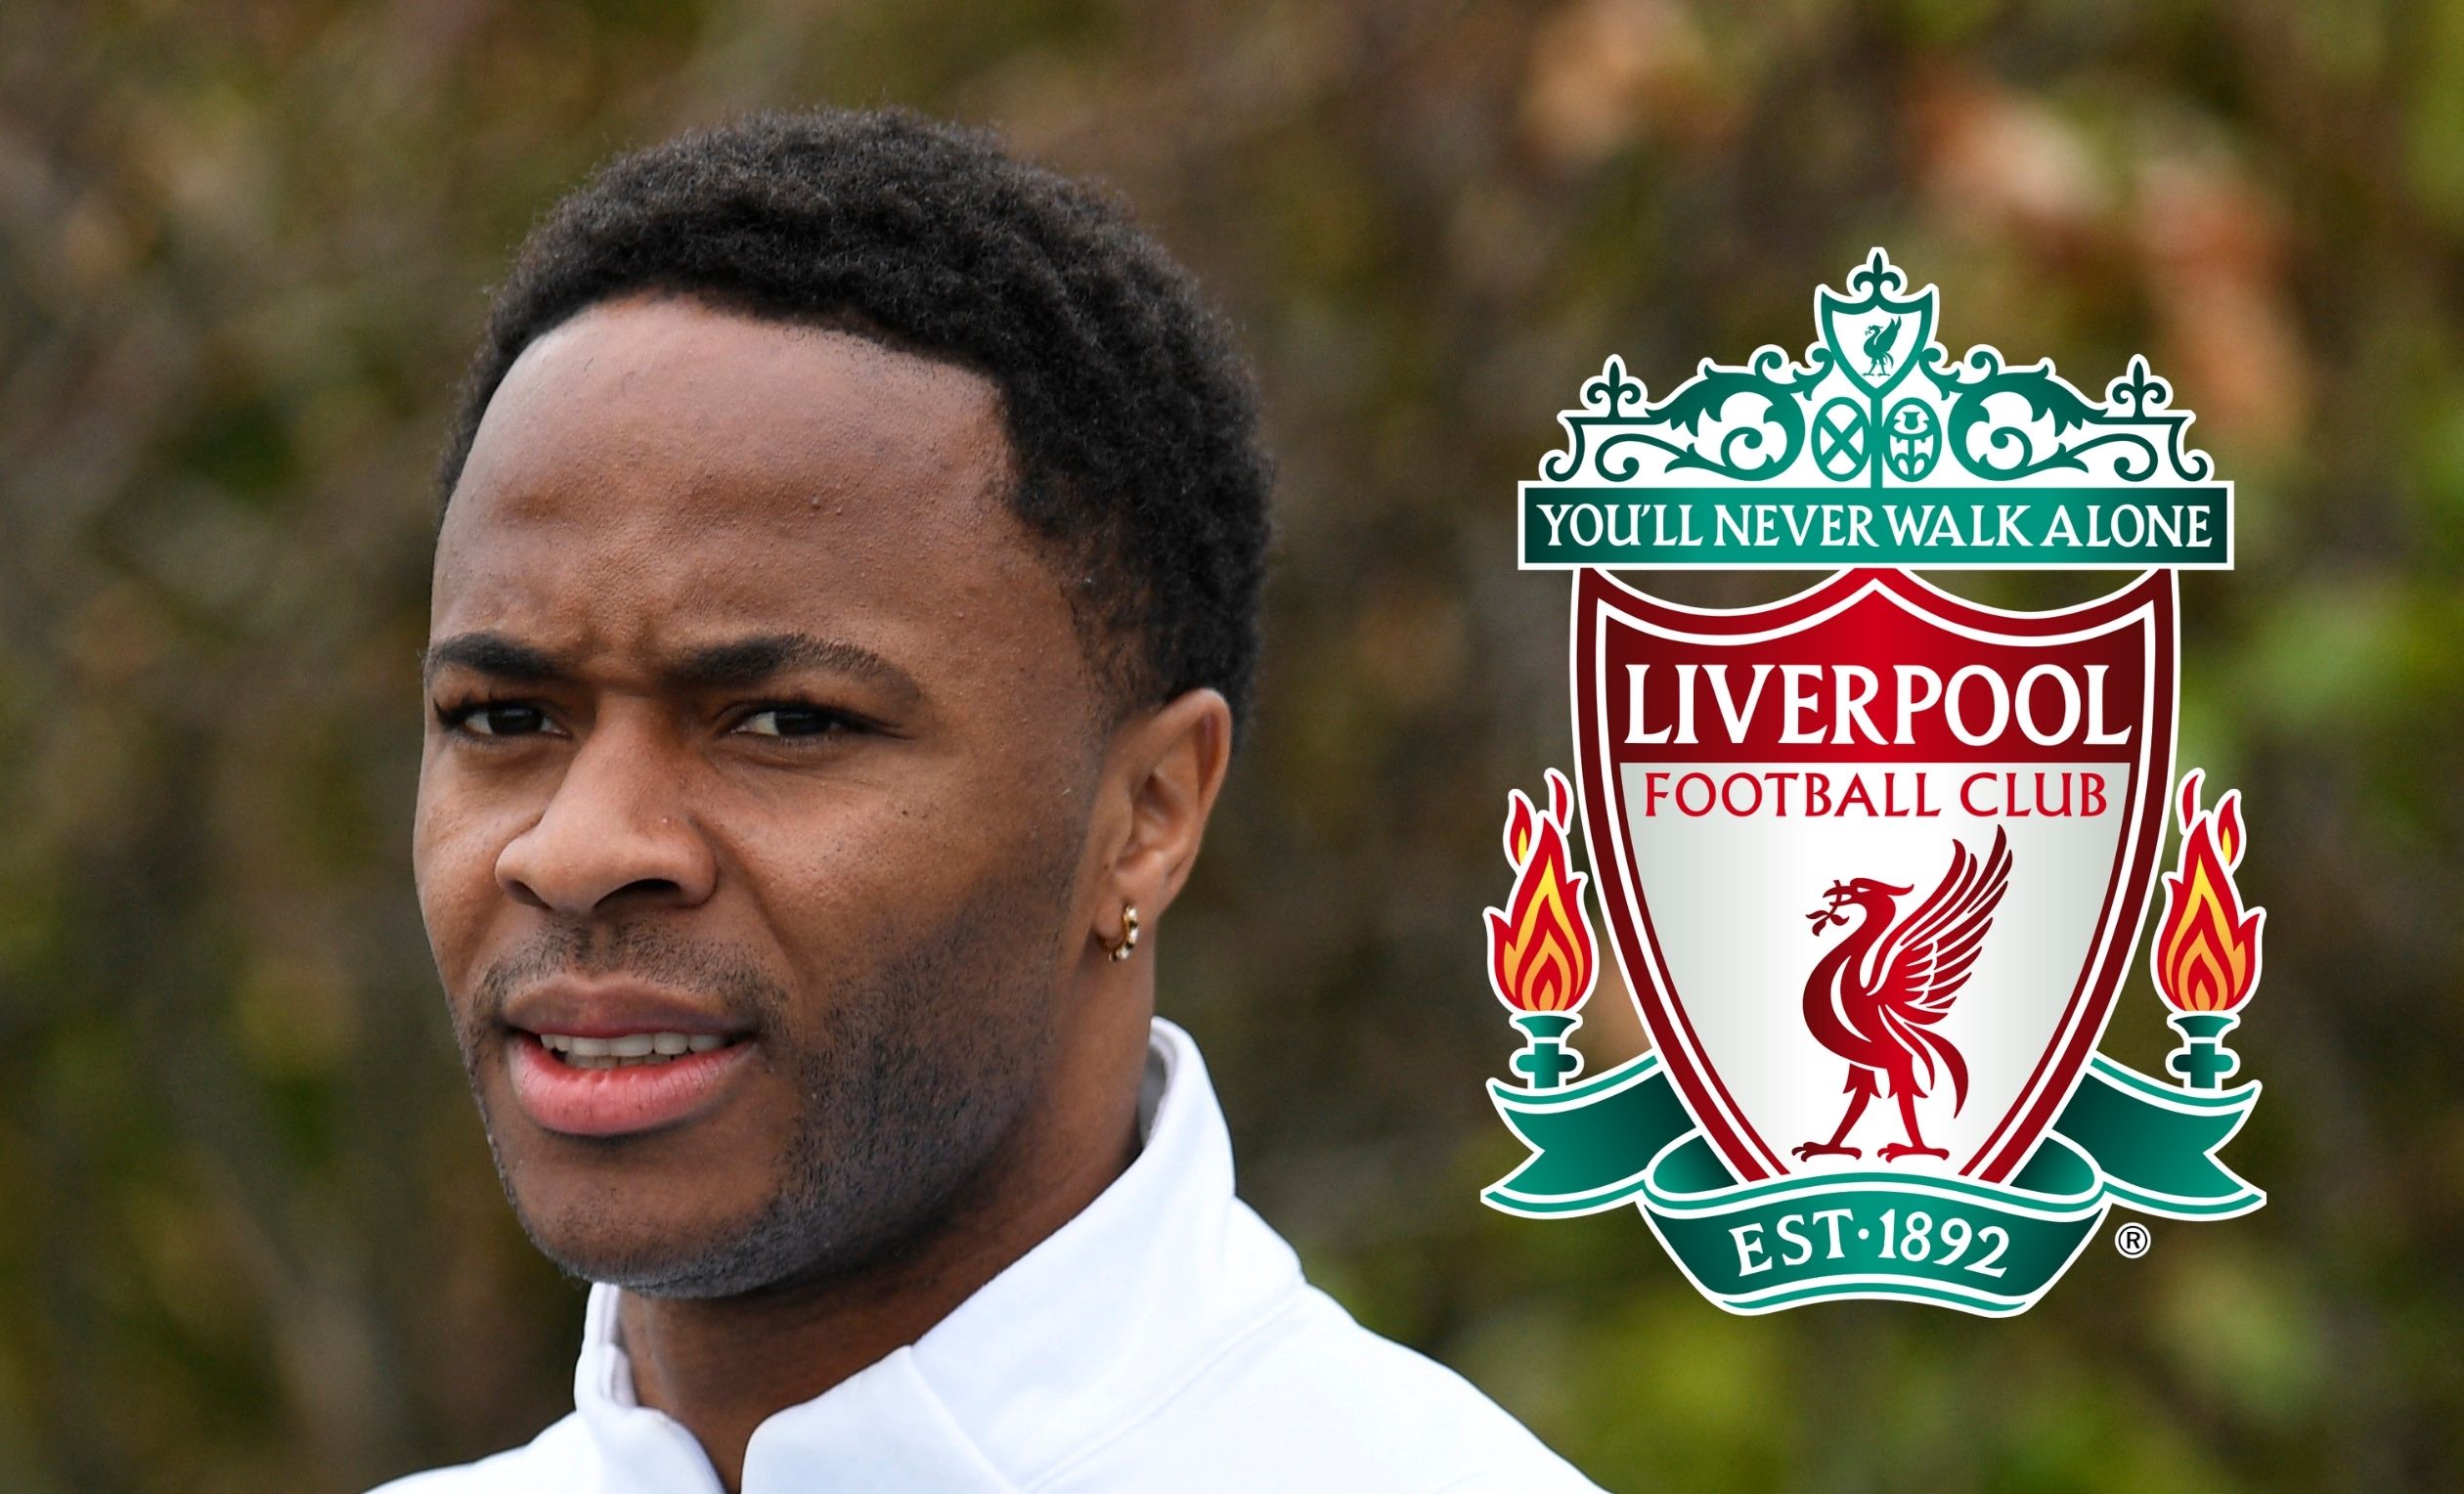 Liverpool were keen on Raheem Sterling reunion prior to Chelsea completing signing of Man City star – chief Mirror football writer